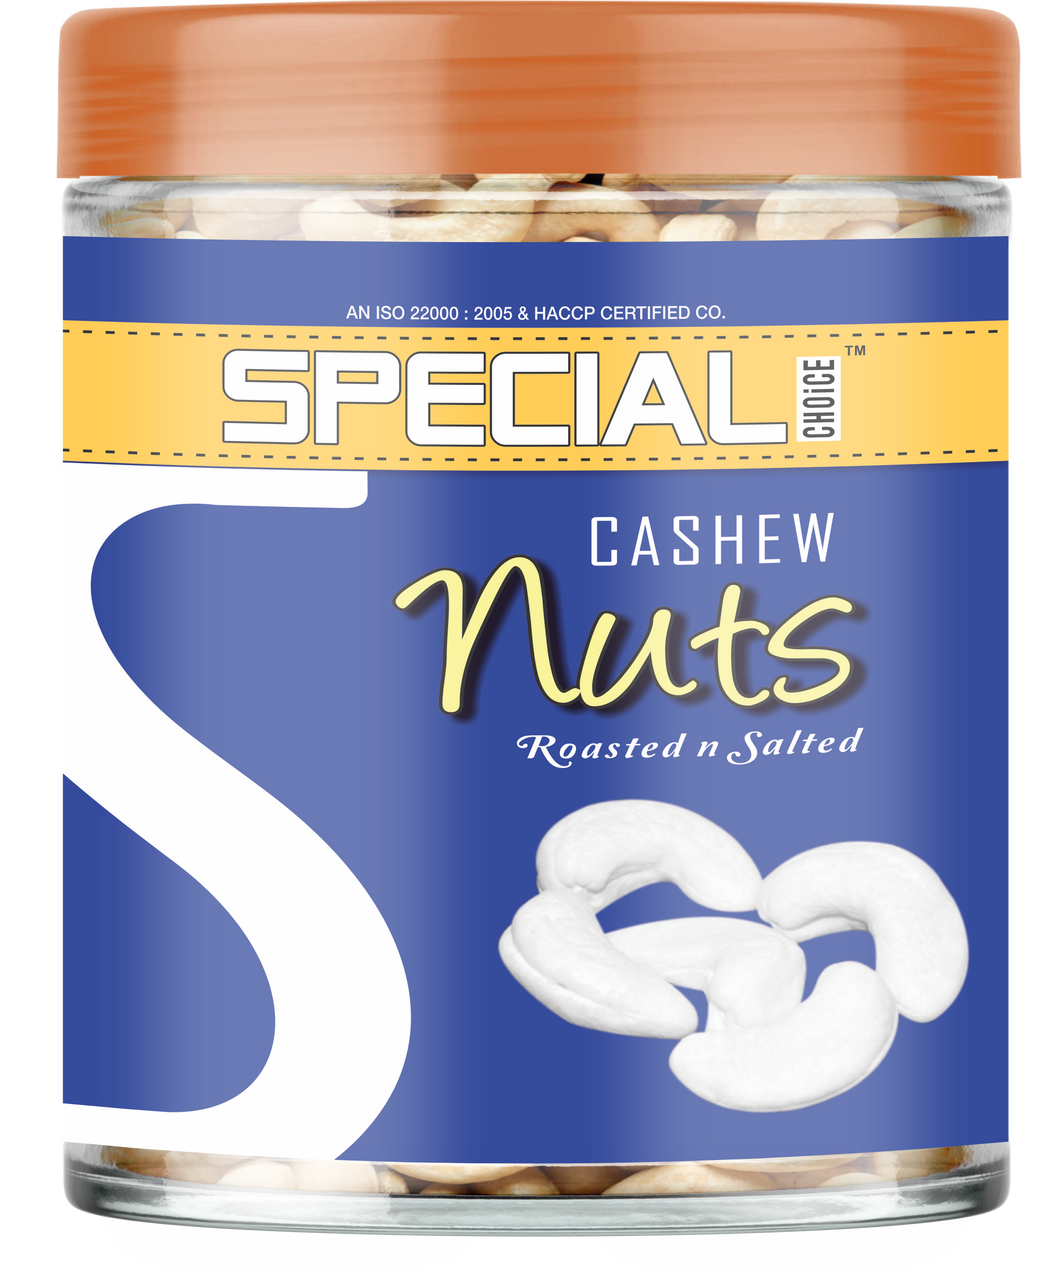 Special Choice Cashew Nuts Roasted & Lightly Salted Jar 250g | Not-Fried | High Protein, Fiber, Healthy Fats | Healthy & Tasty Dry Fruit